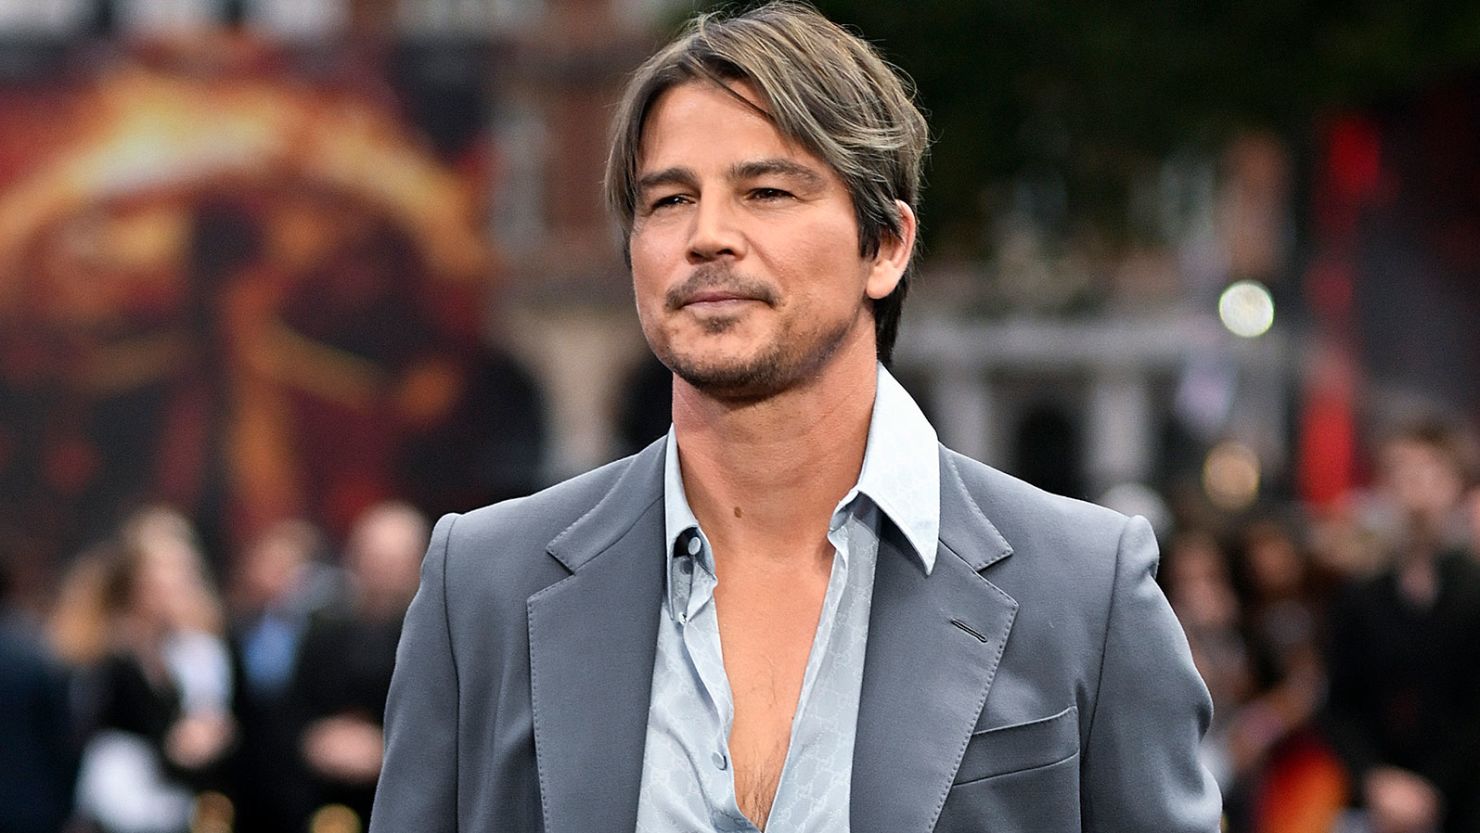 Josh Hartnett at the "Oppenheimer" UK Premiere at Odeon Luxe Leicester Square on July 13, 2023 in London, England.